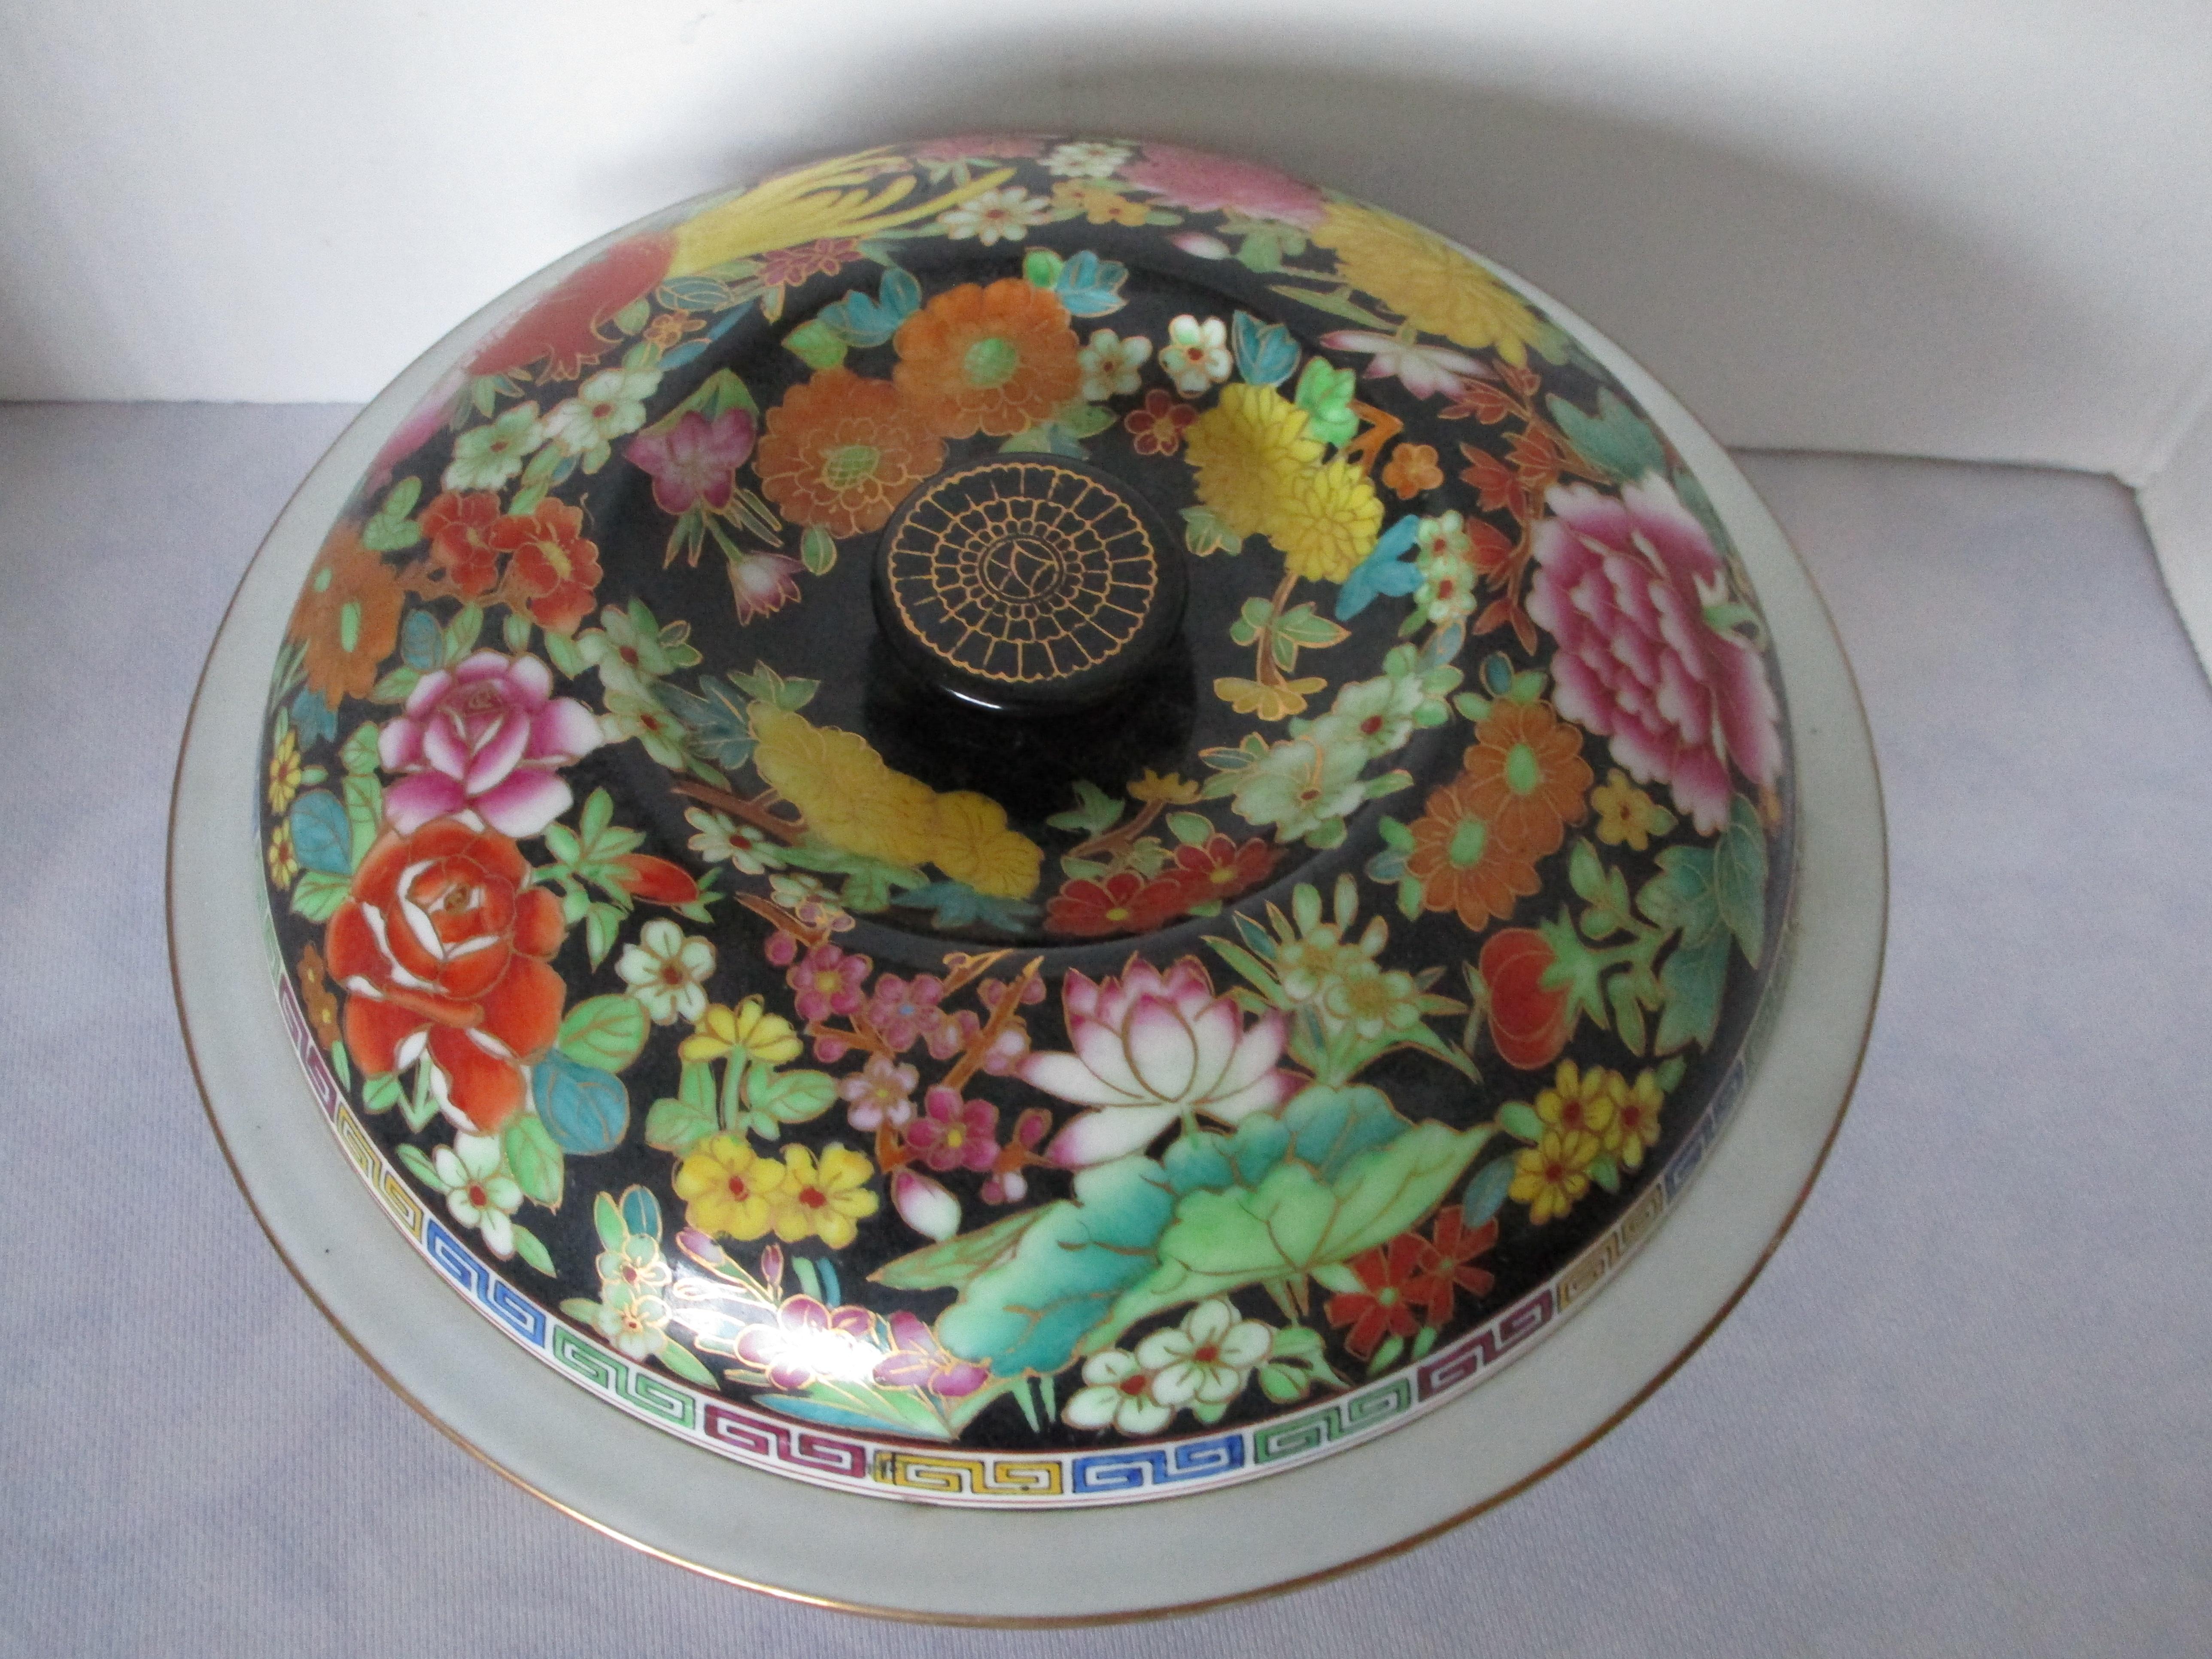 Vintage Chinese Export Famille Noir, Mille Fleurs Dinner Service In Good Condition For Sale In Lomita, CA